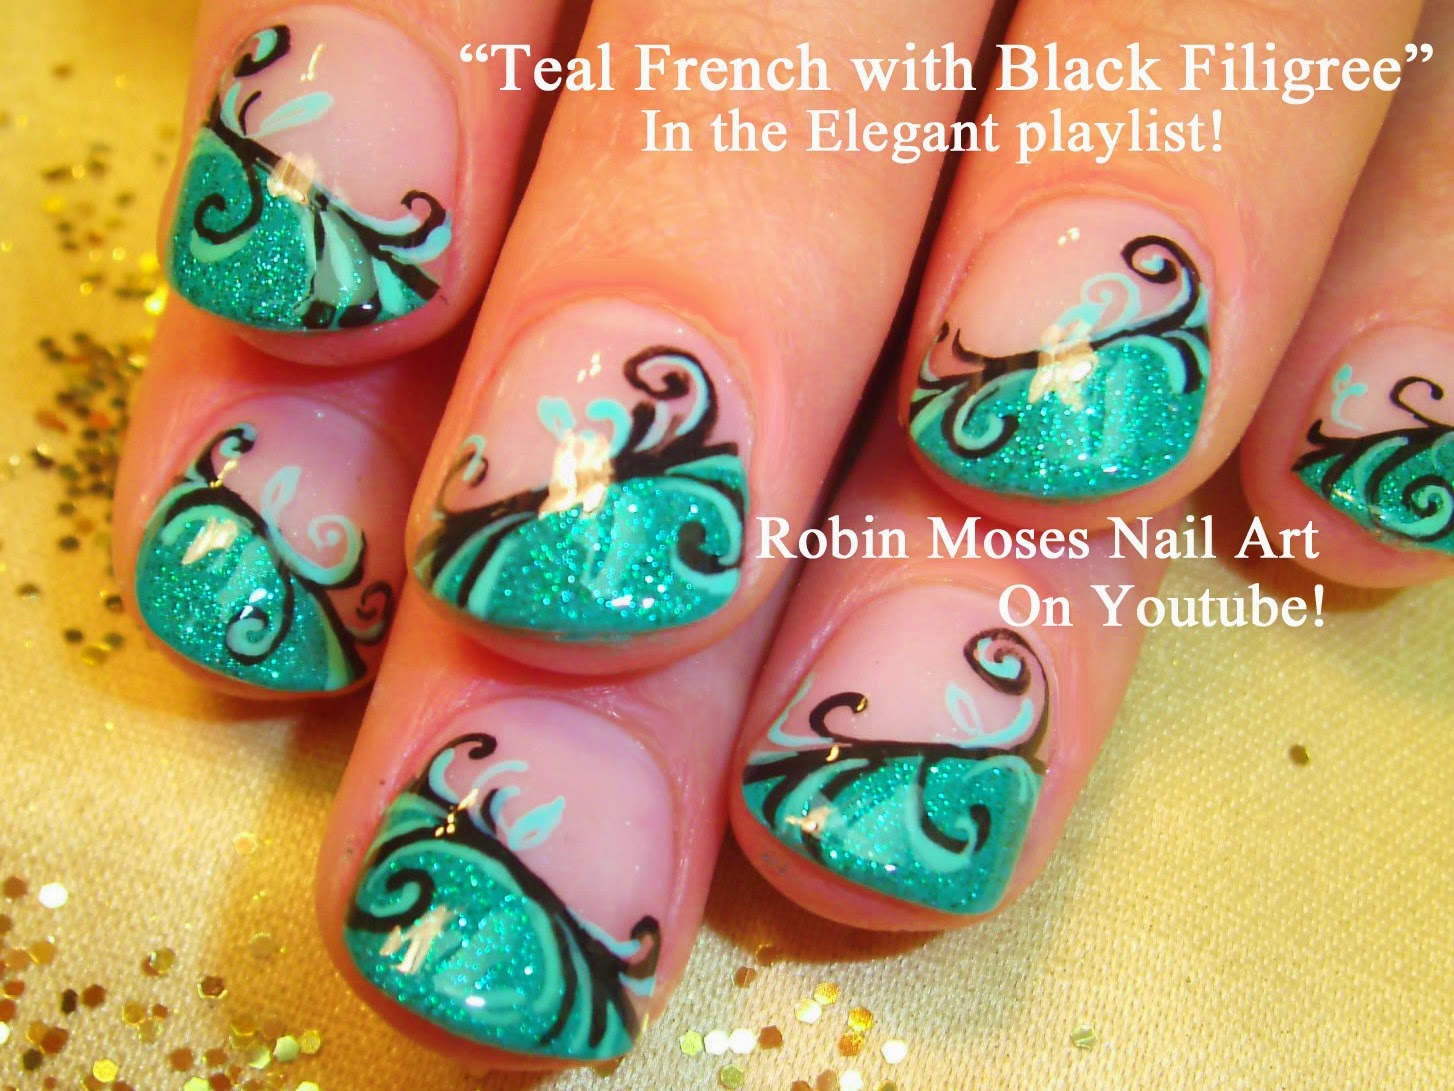 Robin Moses Nail Art - French Pink and White Nails with Glitter - wide 8